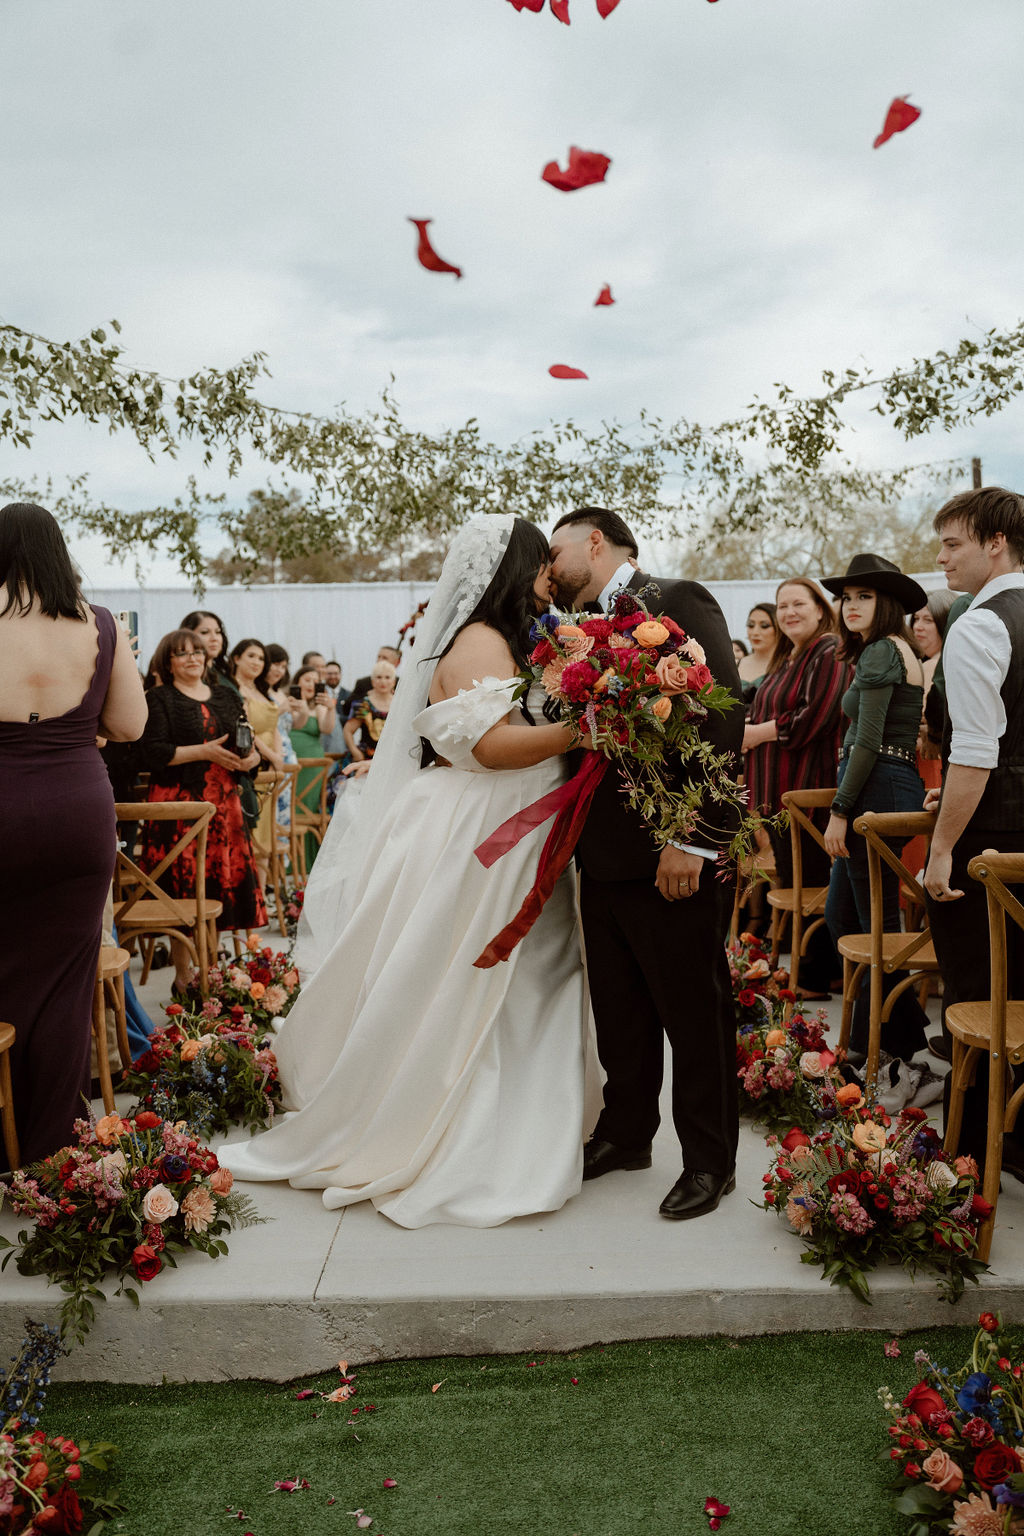 A bride and groom kiss amidst scattered rose petals during their wedding ceremony, surrounded by guests and floral decorations.